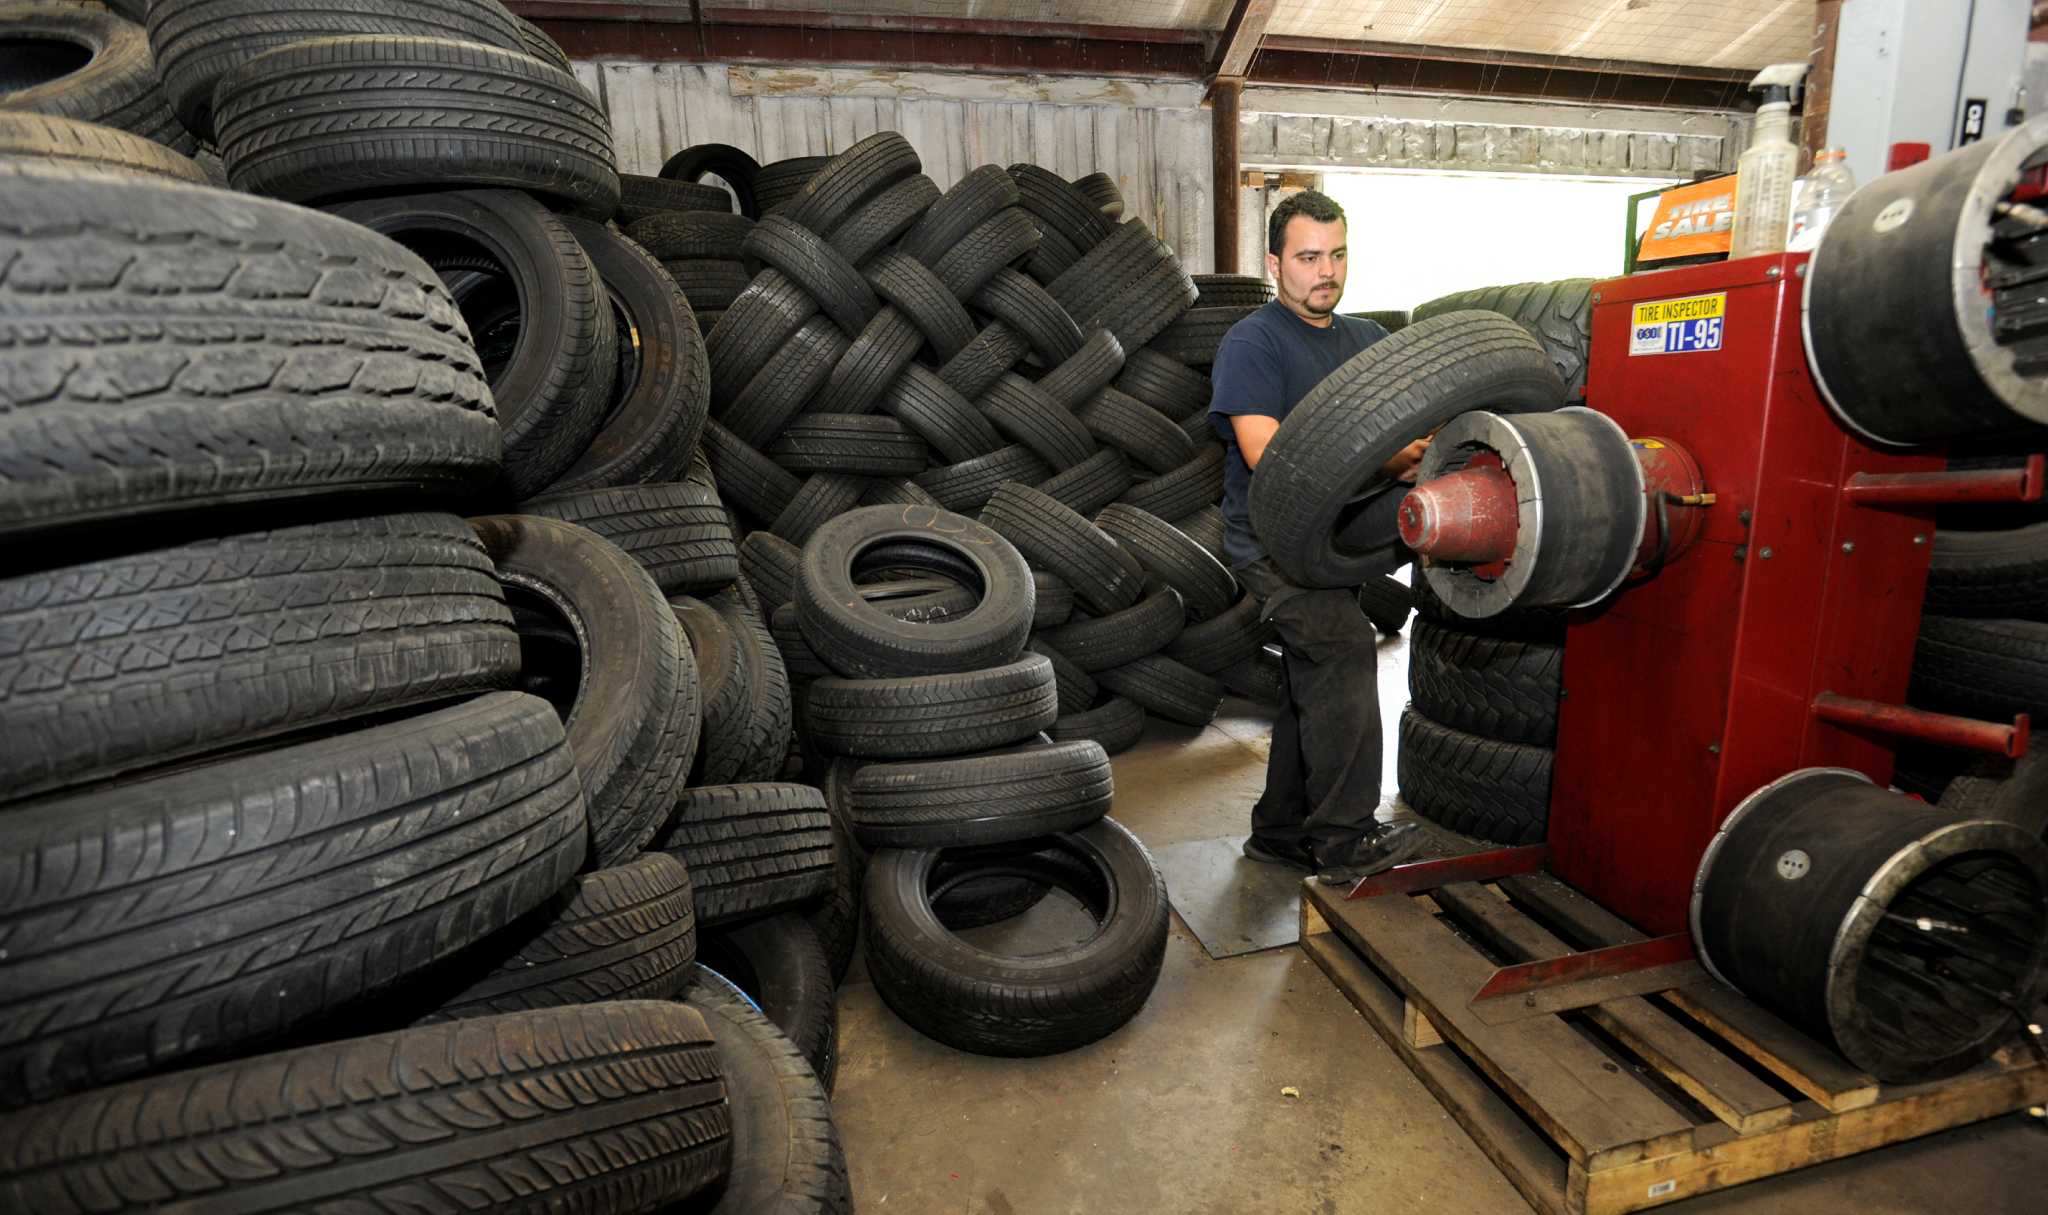 Used-tire shop offers options in New Milford